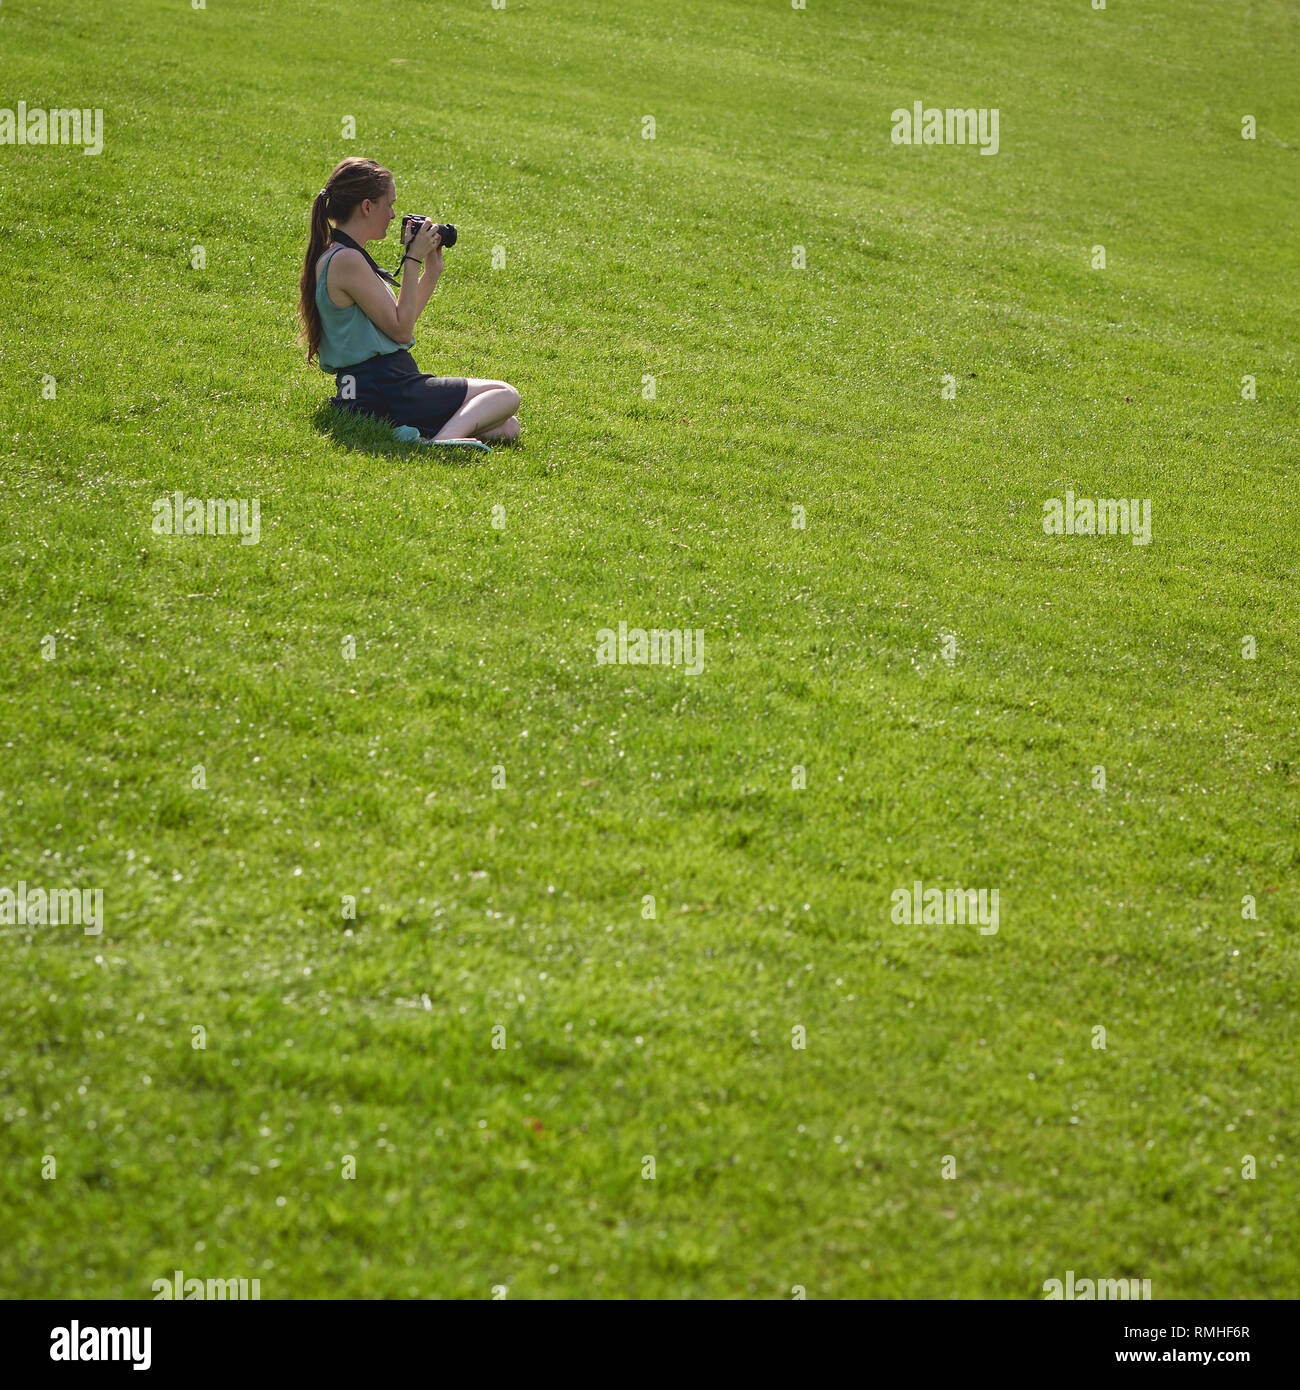 London, UK - June, 2018. A young girl taking photographs while sitting on the grass in a park. Stock Photo